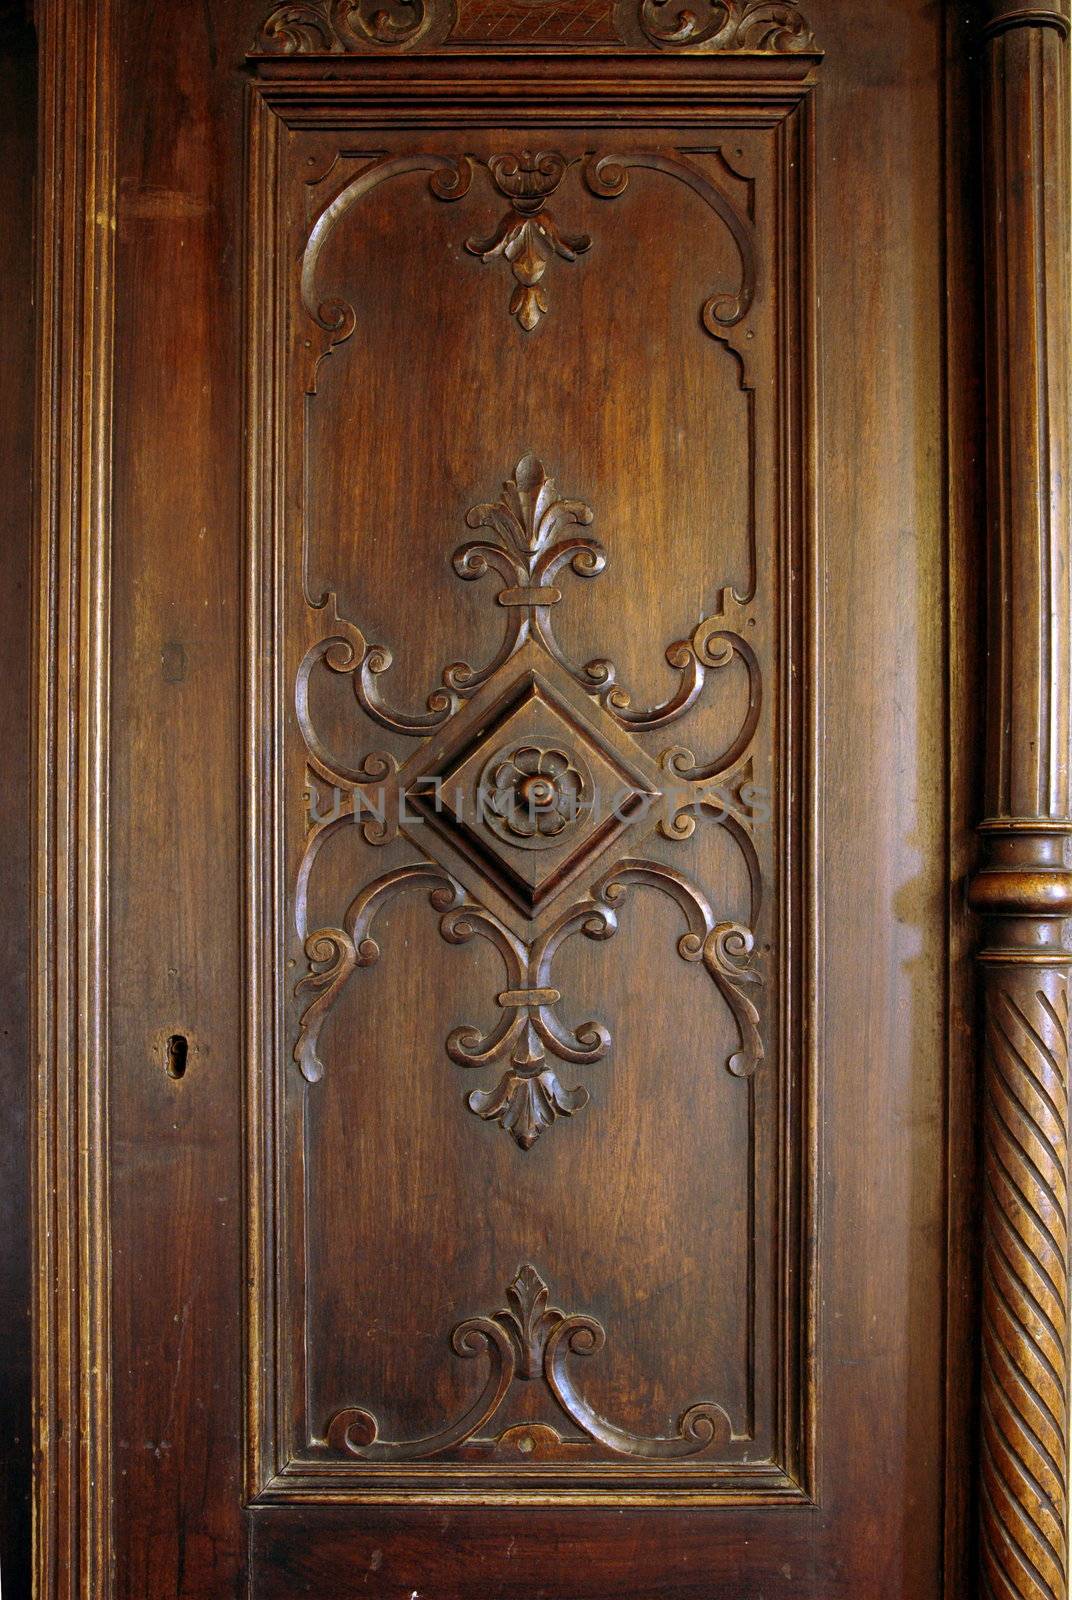 A picture of a wooden carved door of an antique closet